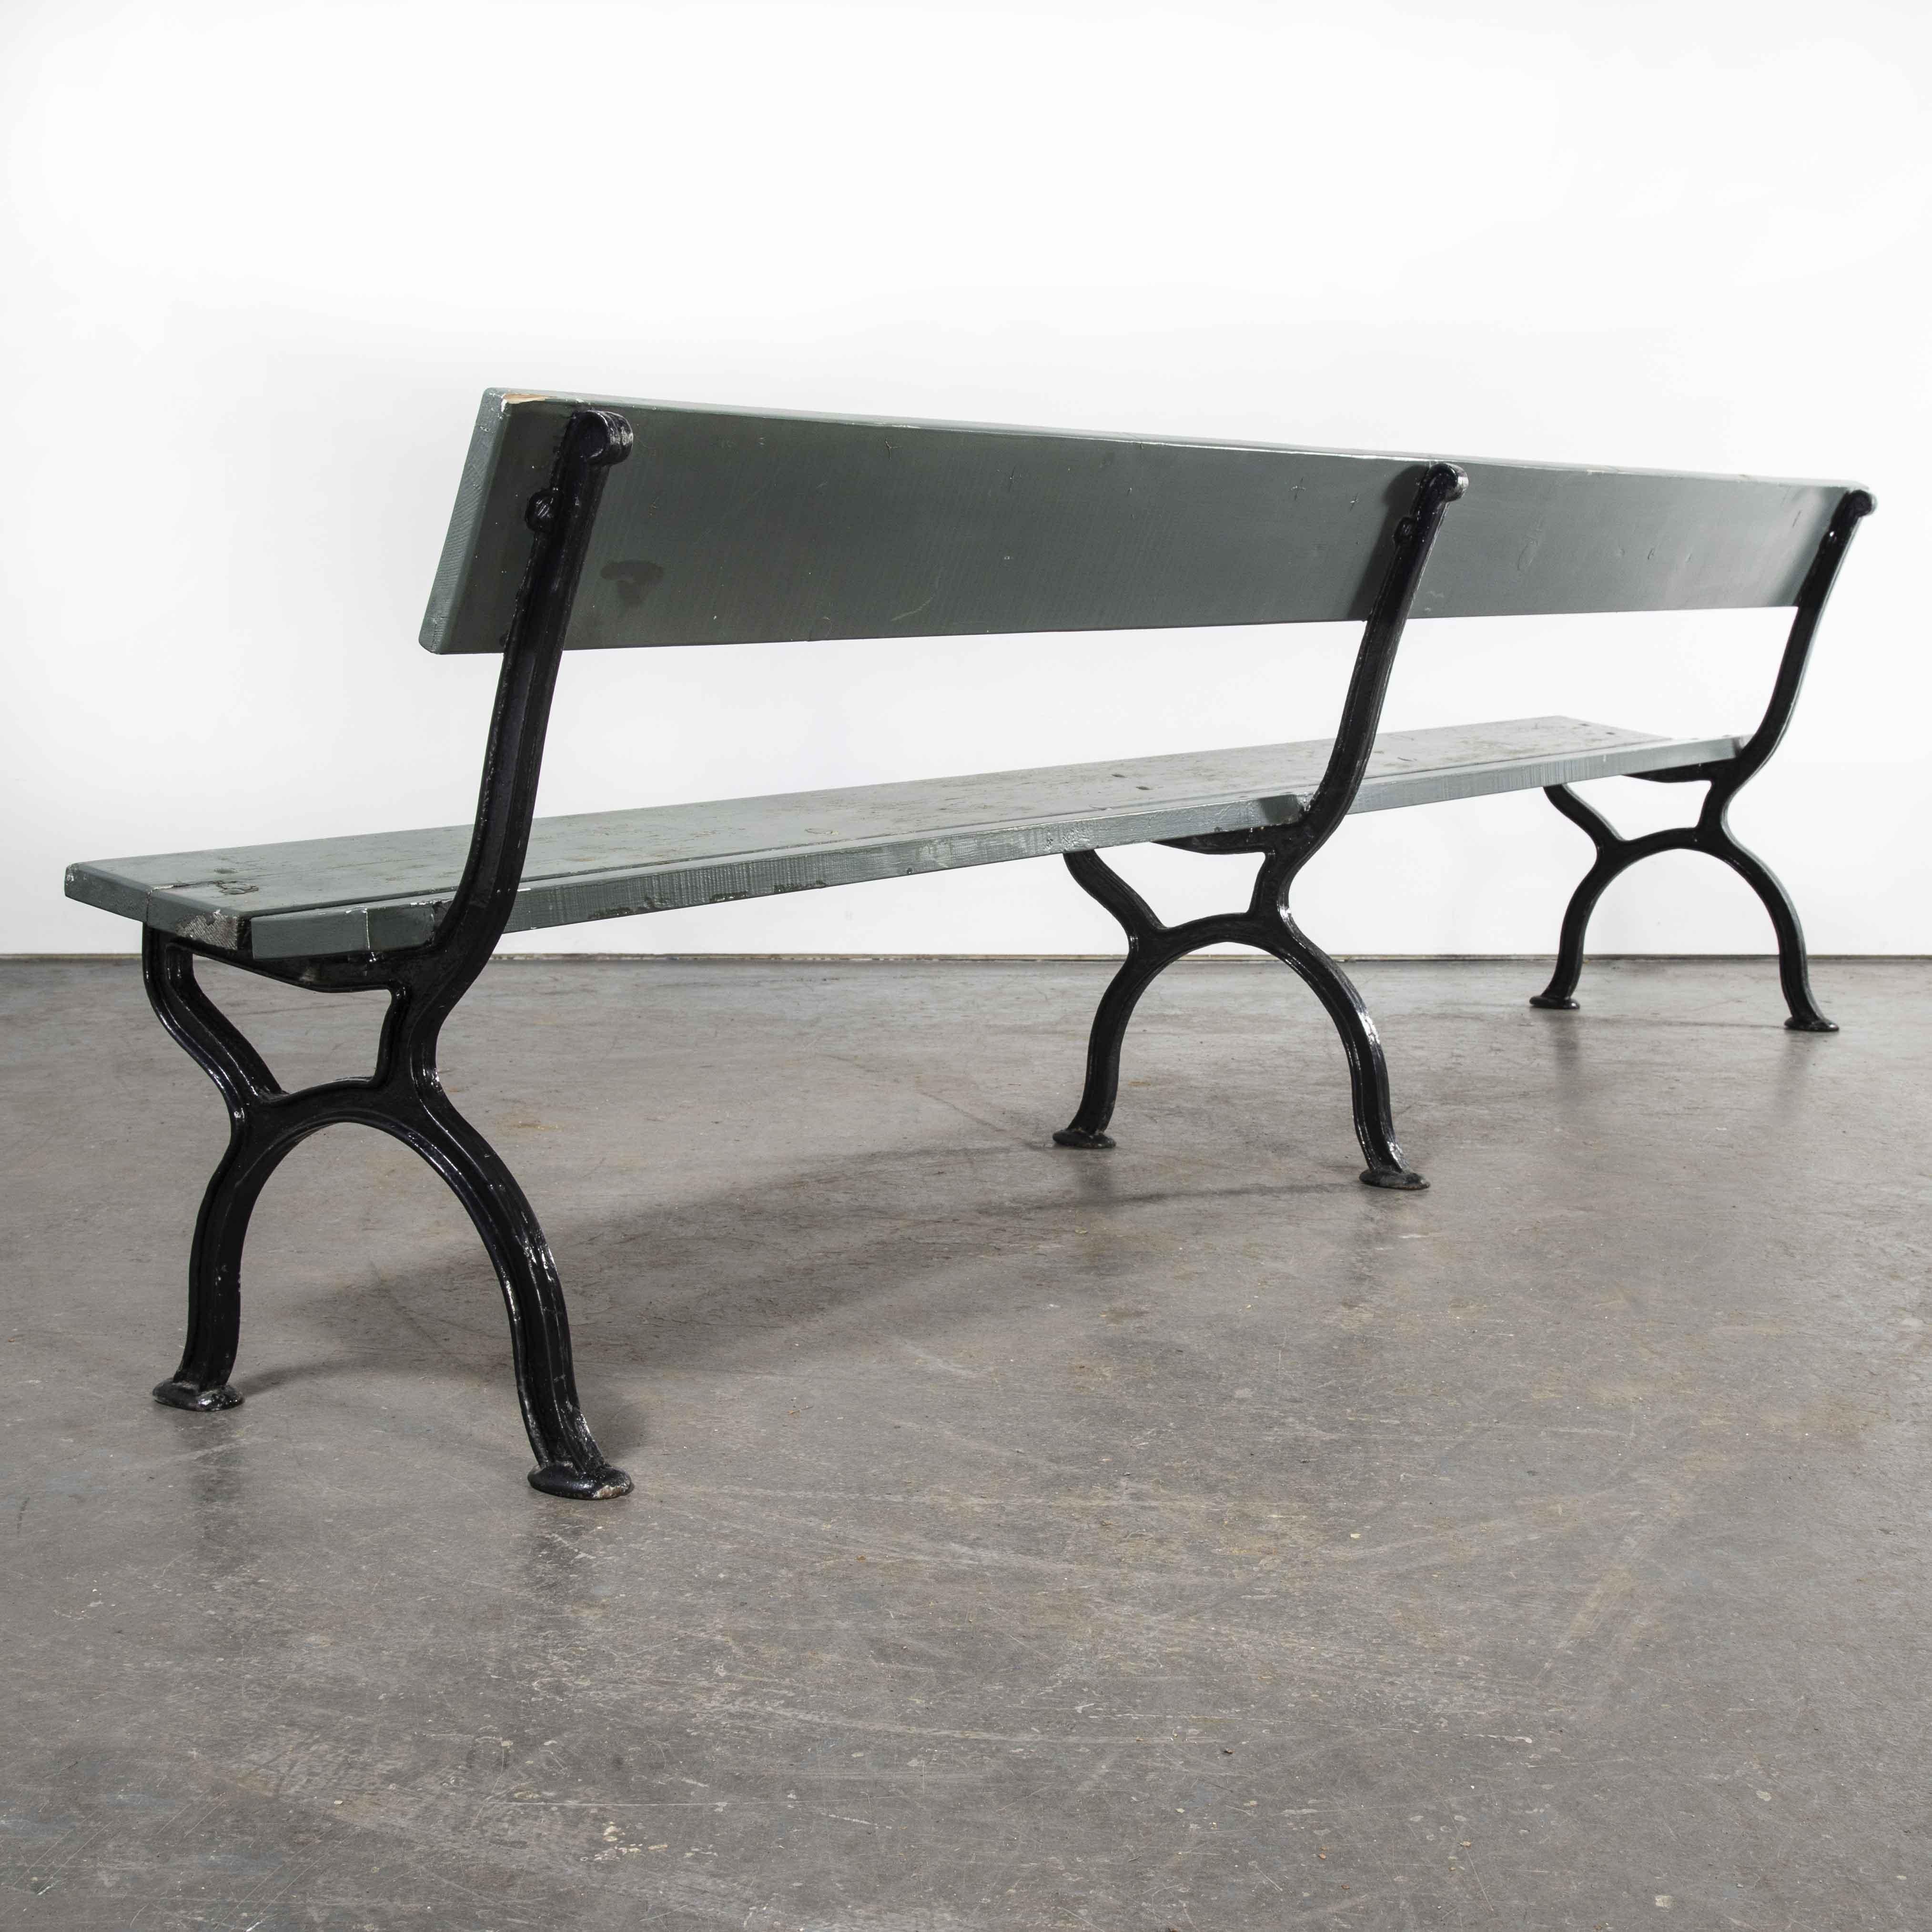 1960’s Long Green French Station Bench With Cast Legs

1960’s Long Green French Station Bench With Cast Legs. Sourced in France this bench would have originally been made for a railway station. The bench features three original heavy cast bases